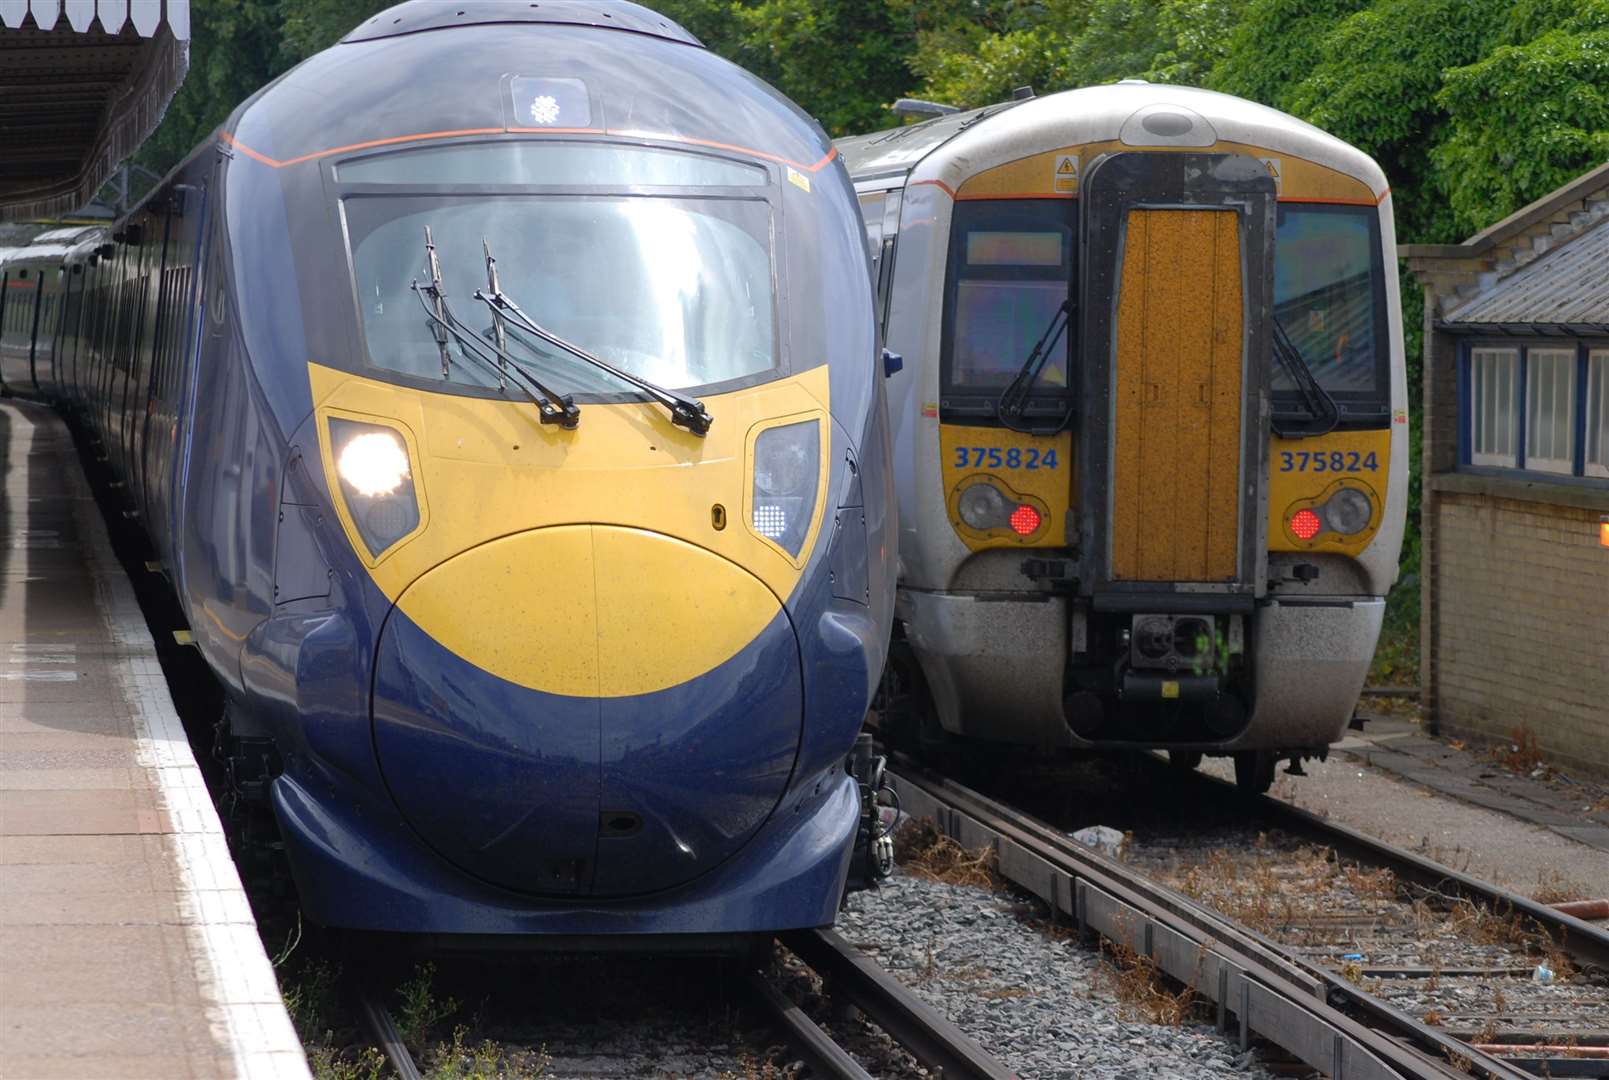 Trains are not running between Ramsgate and Margate